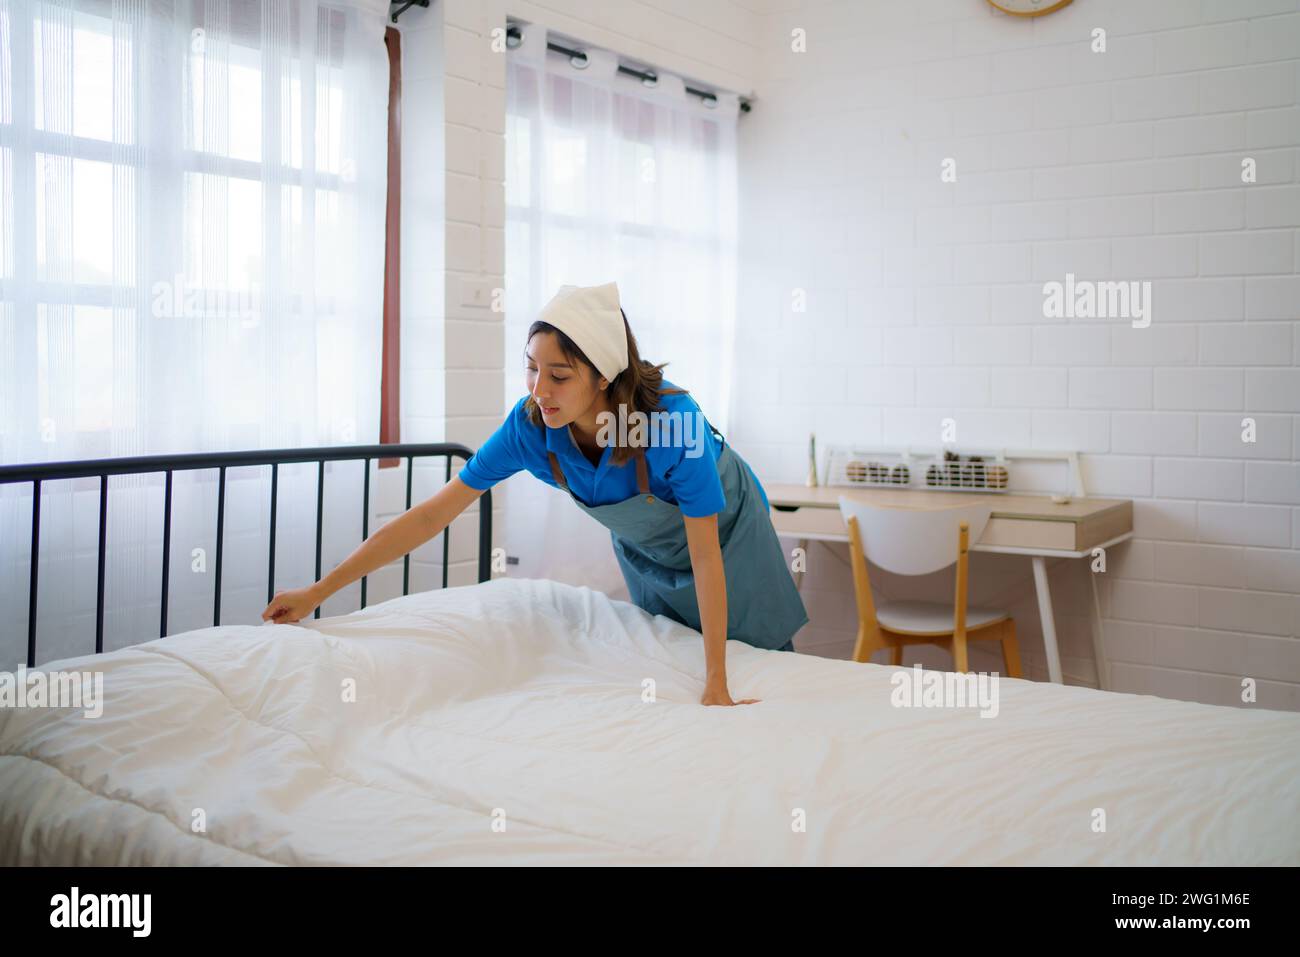 Housekeeper expertly arranges and smooths the bedding in a bedroom professionalism and dedication of the housekeeping team Stock Photo